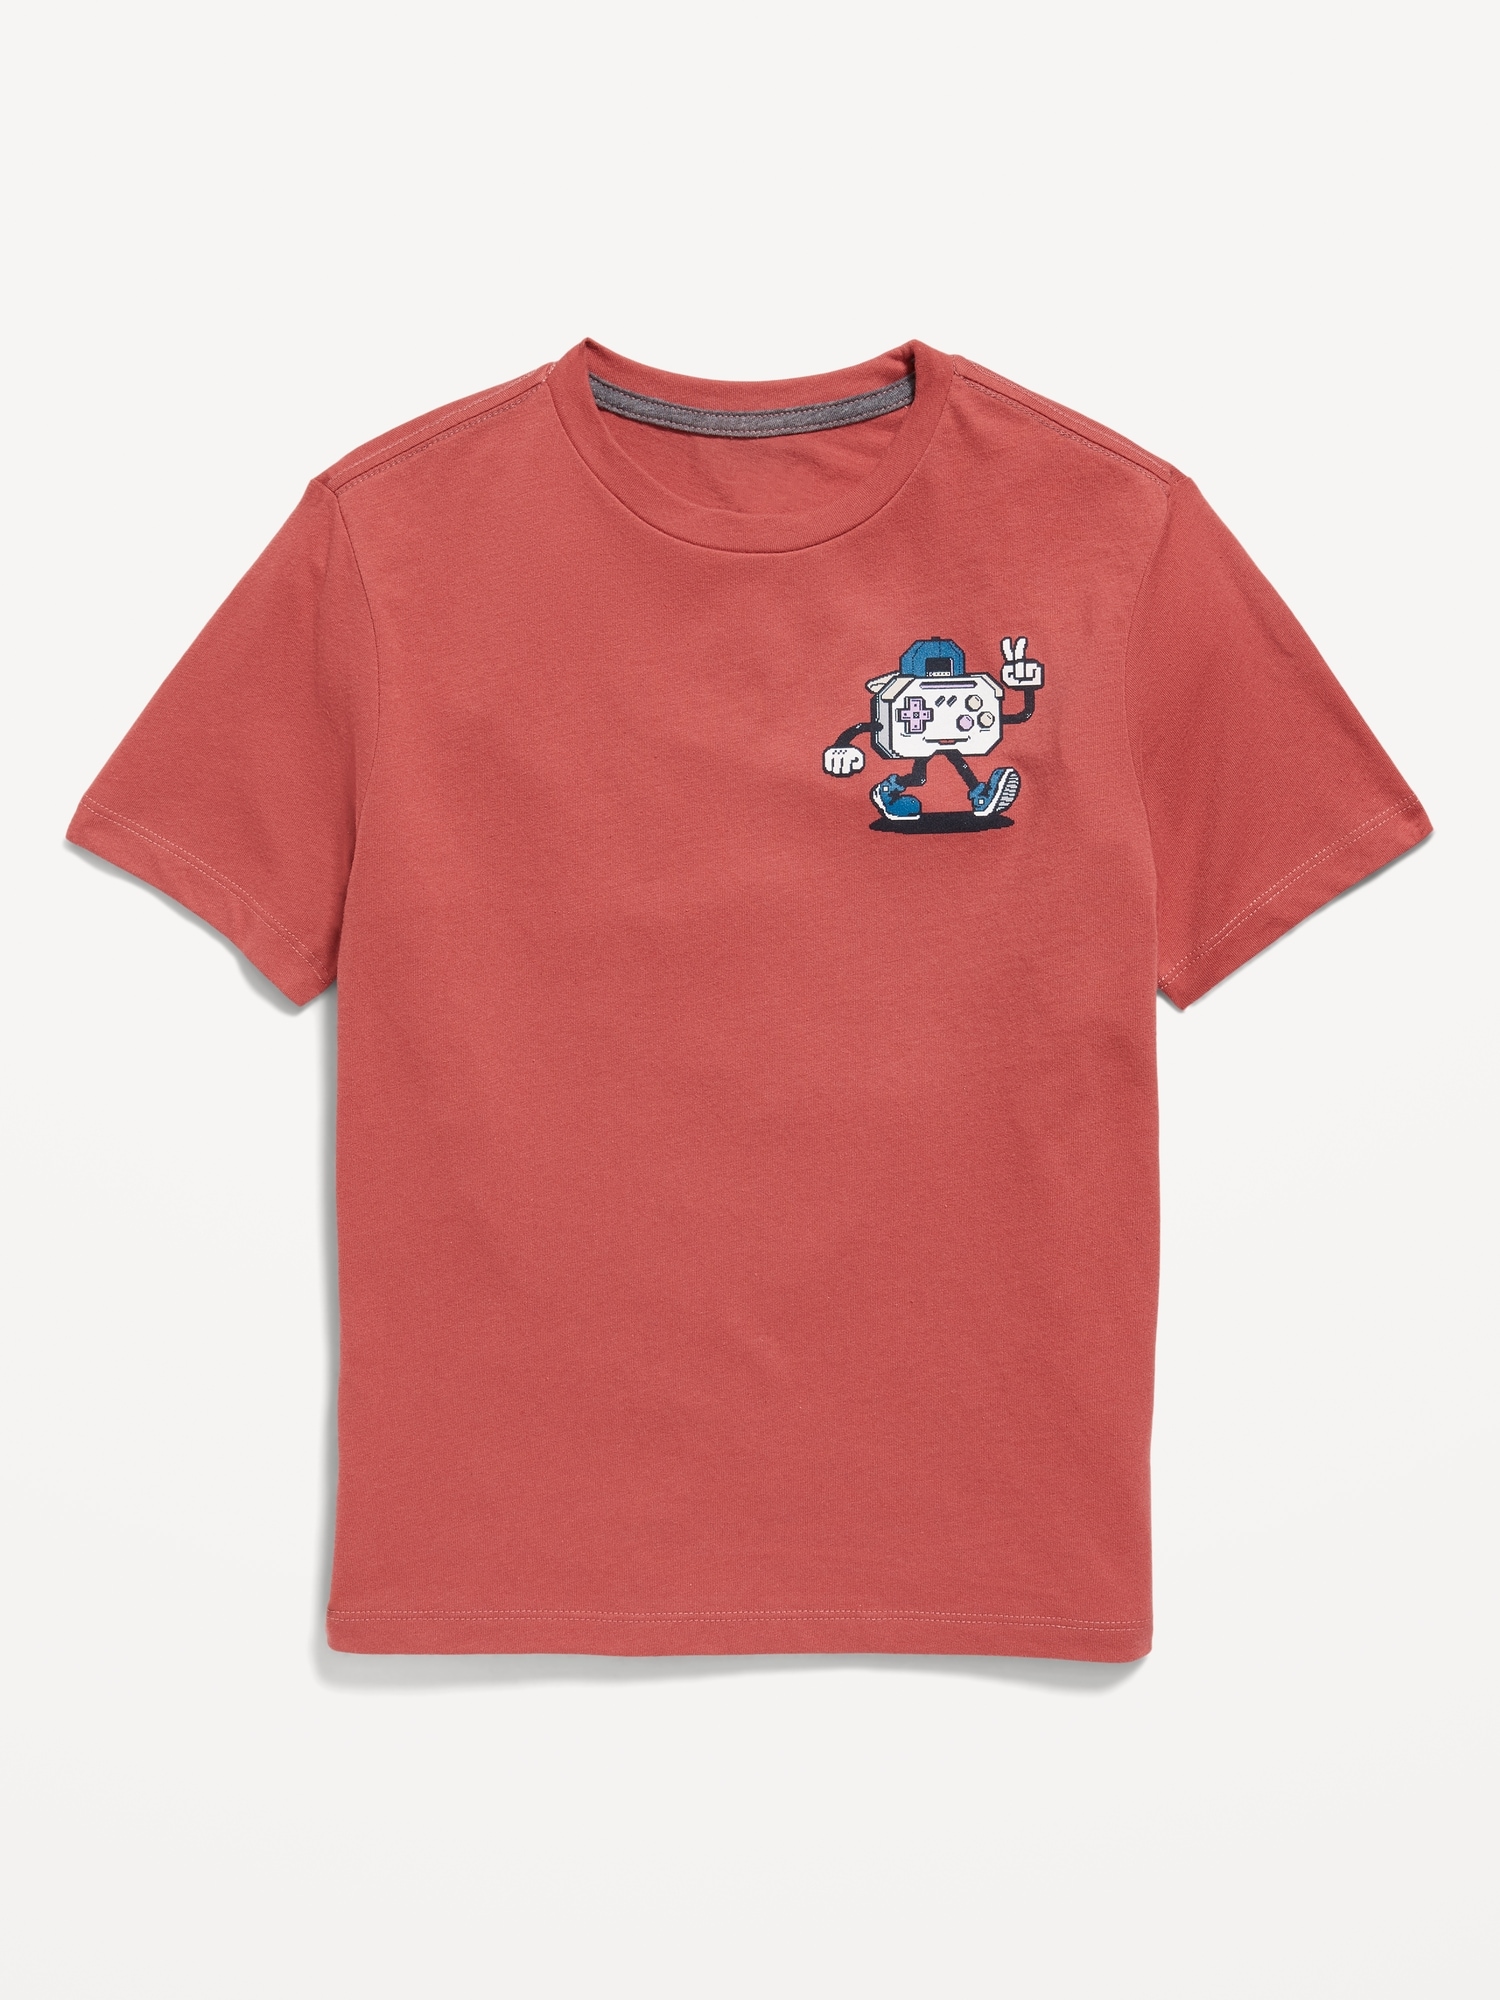 Old Navy Graphic Crew-Neck T-Shirt for Boys pink. 1